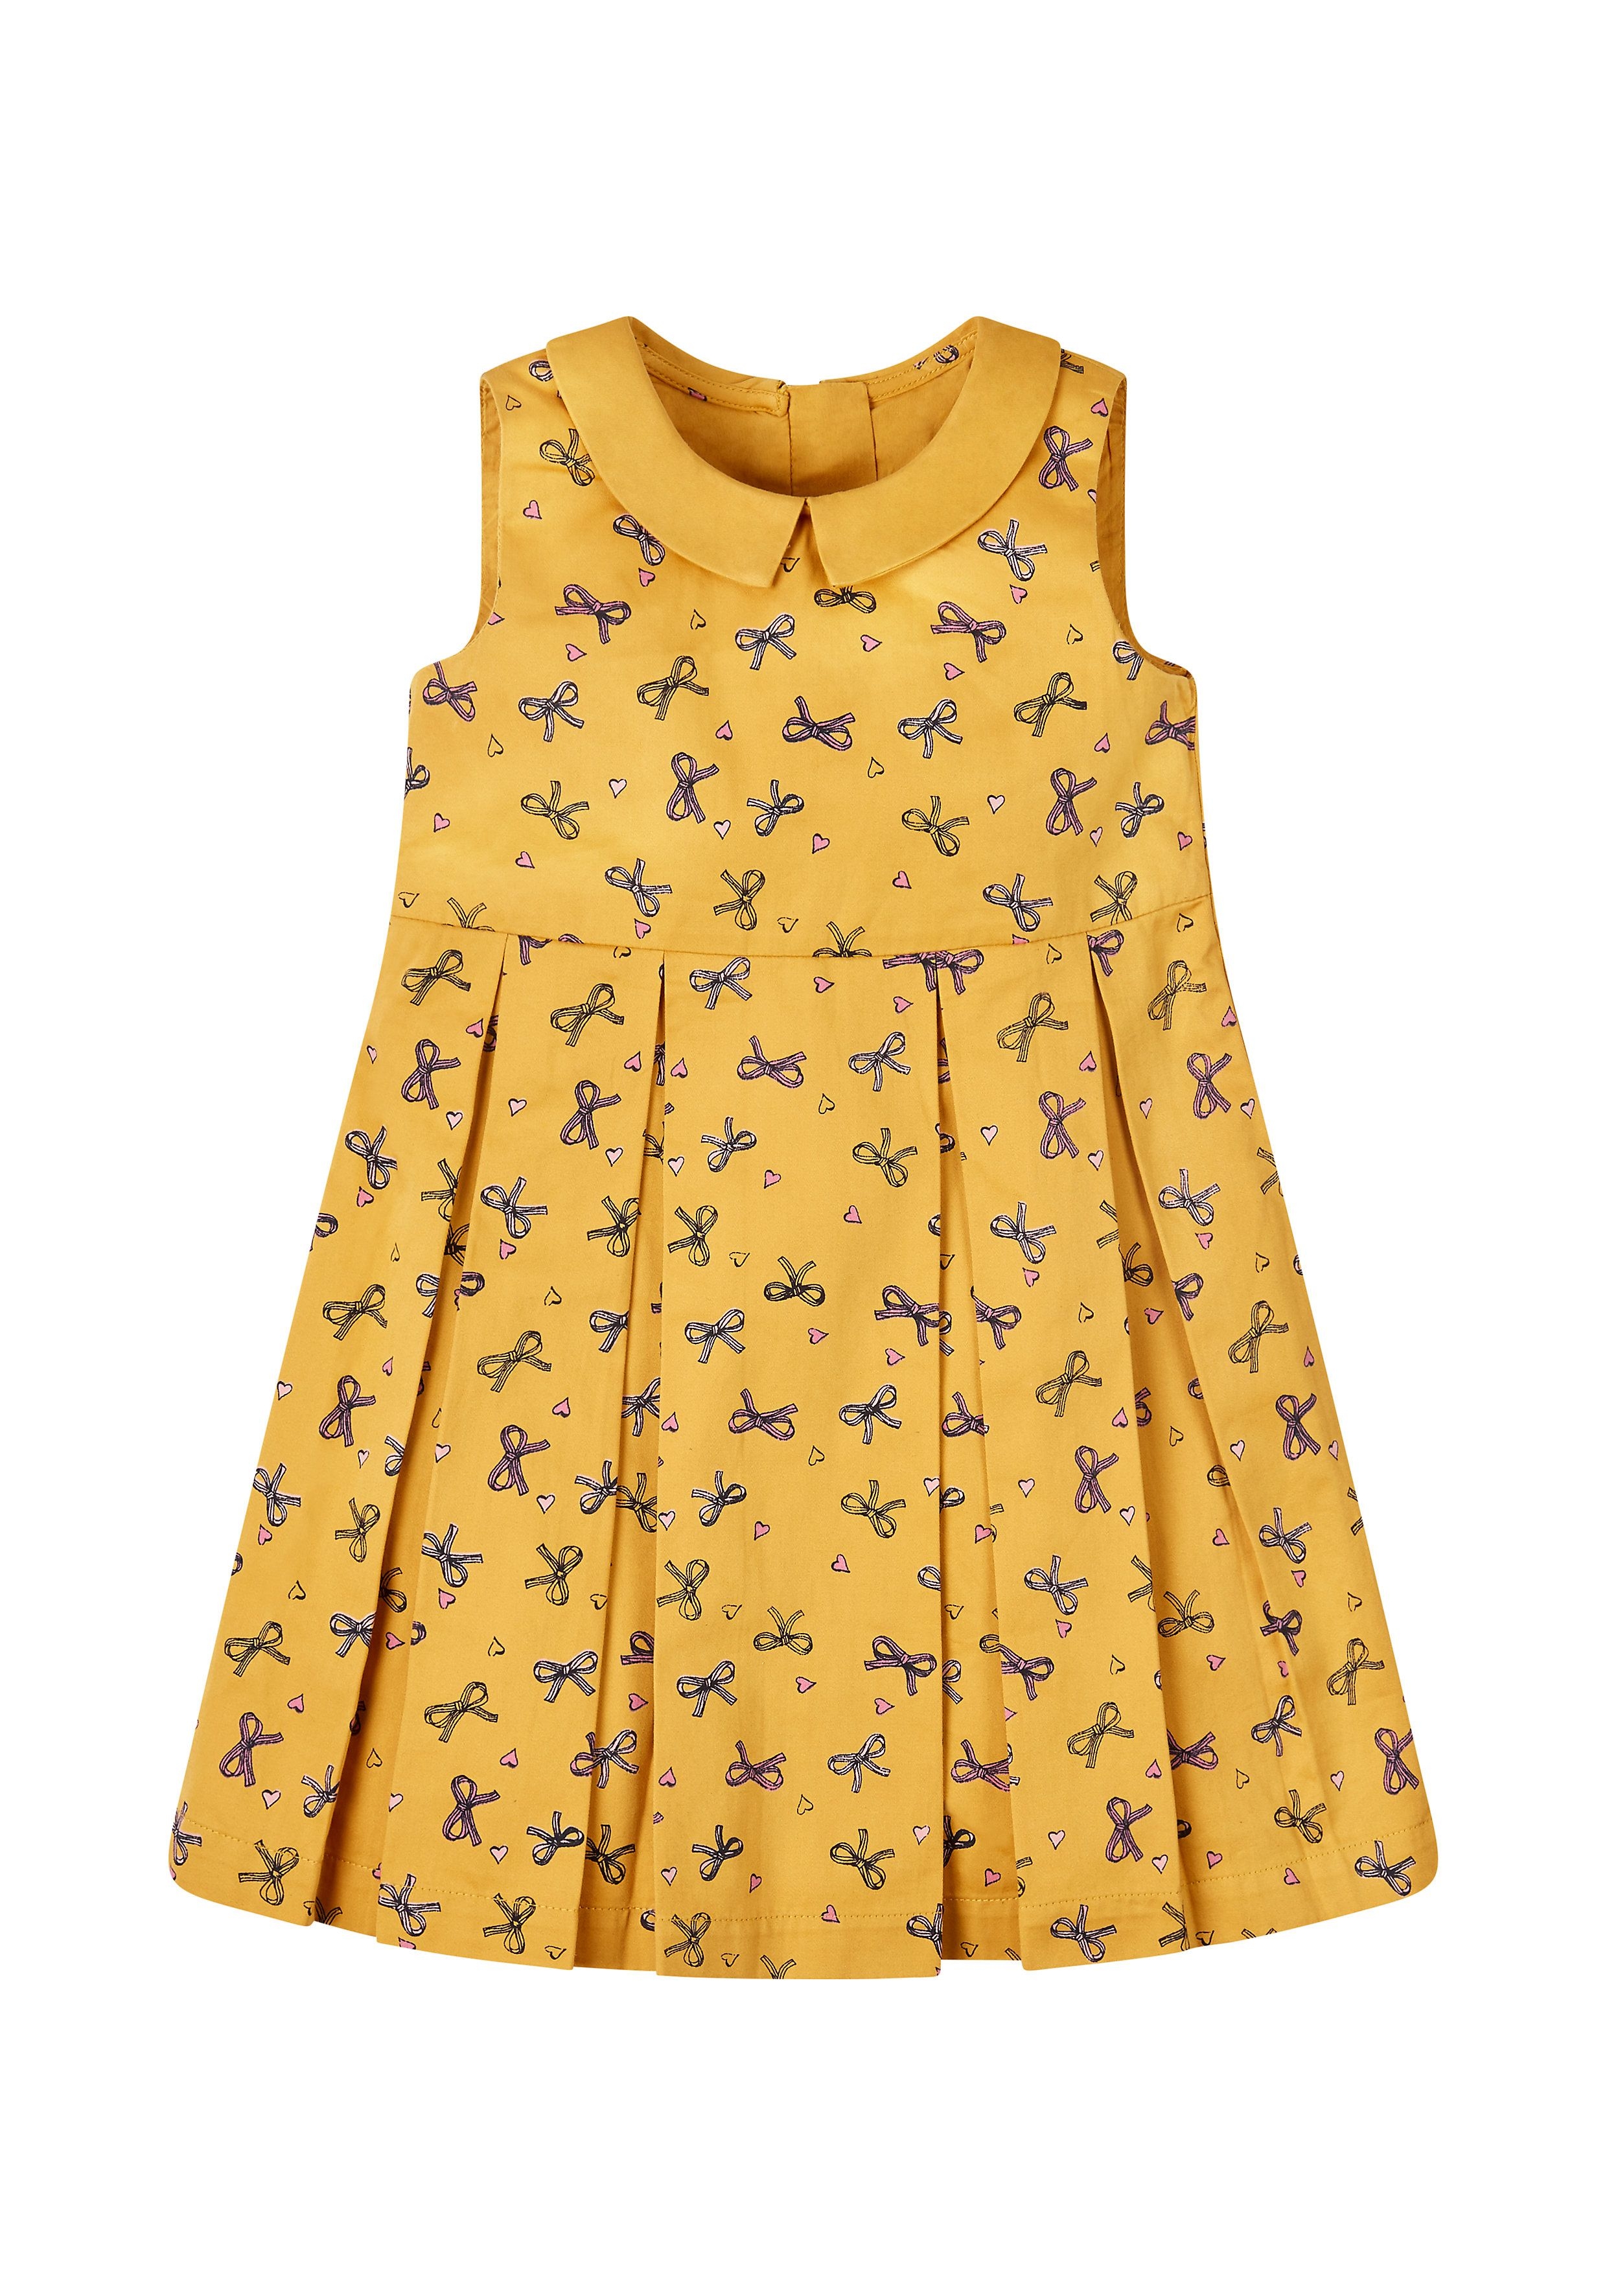 Mothercare | Girls Bow Party Dress - Mustard